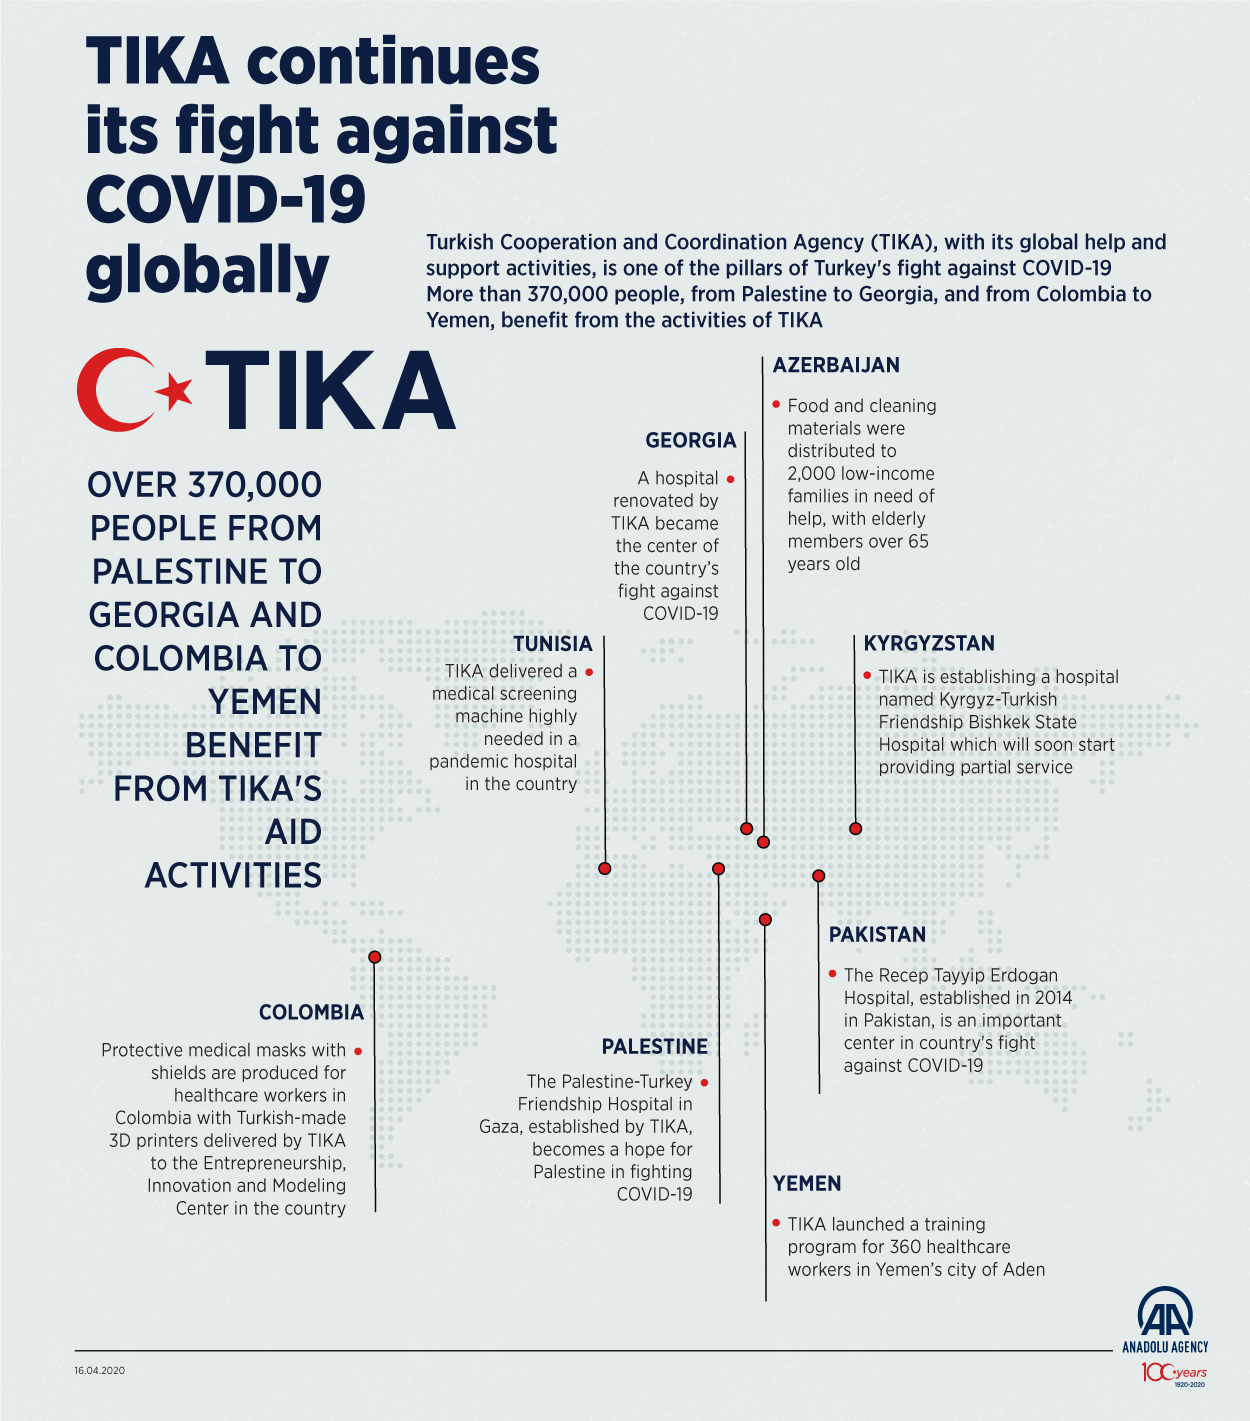 TIKA continues its fight against COVID-19 globally